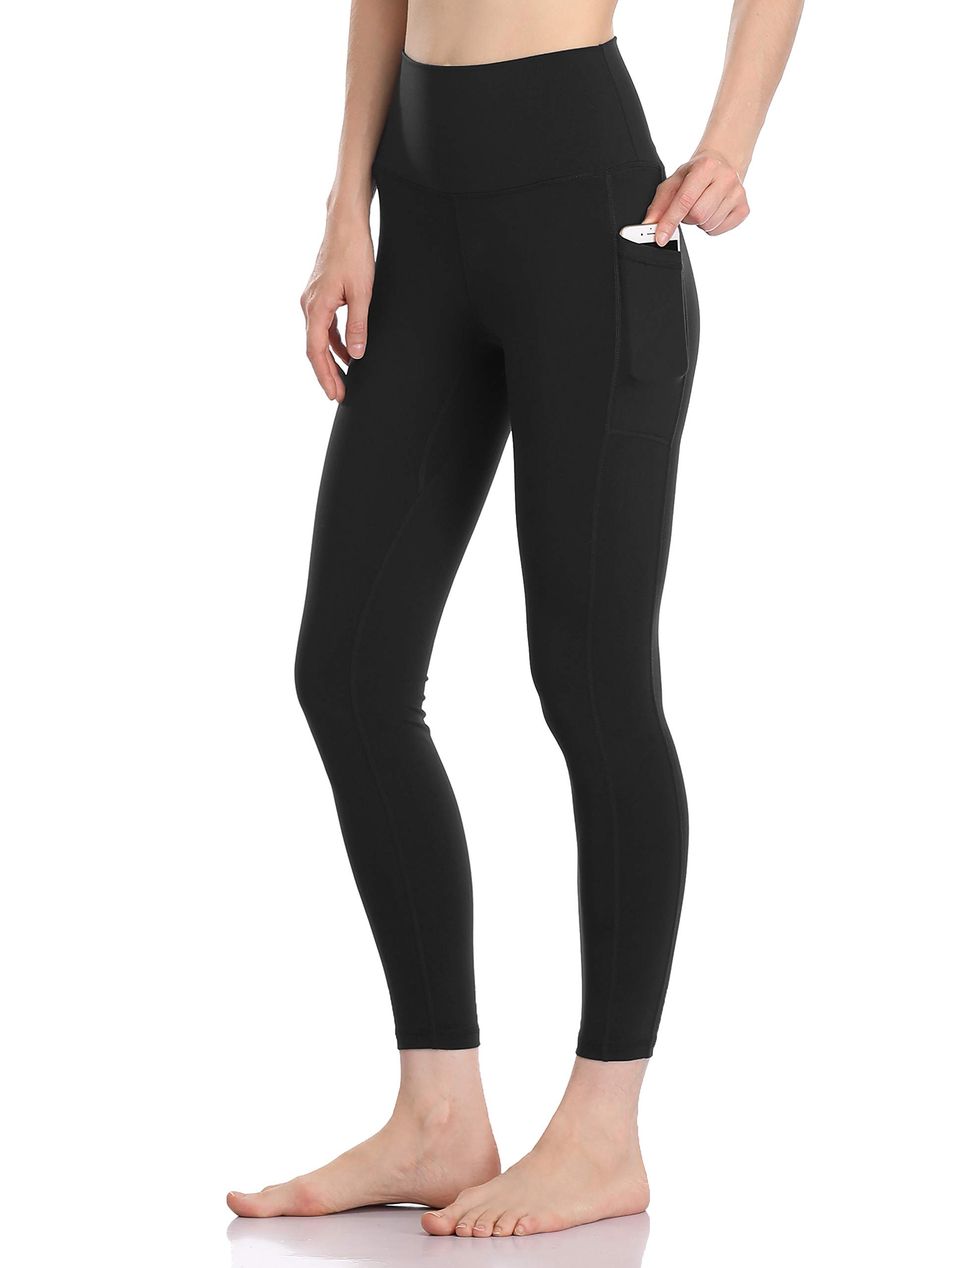 High Waisted Tummy Control Workout Leggings 